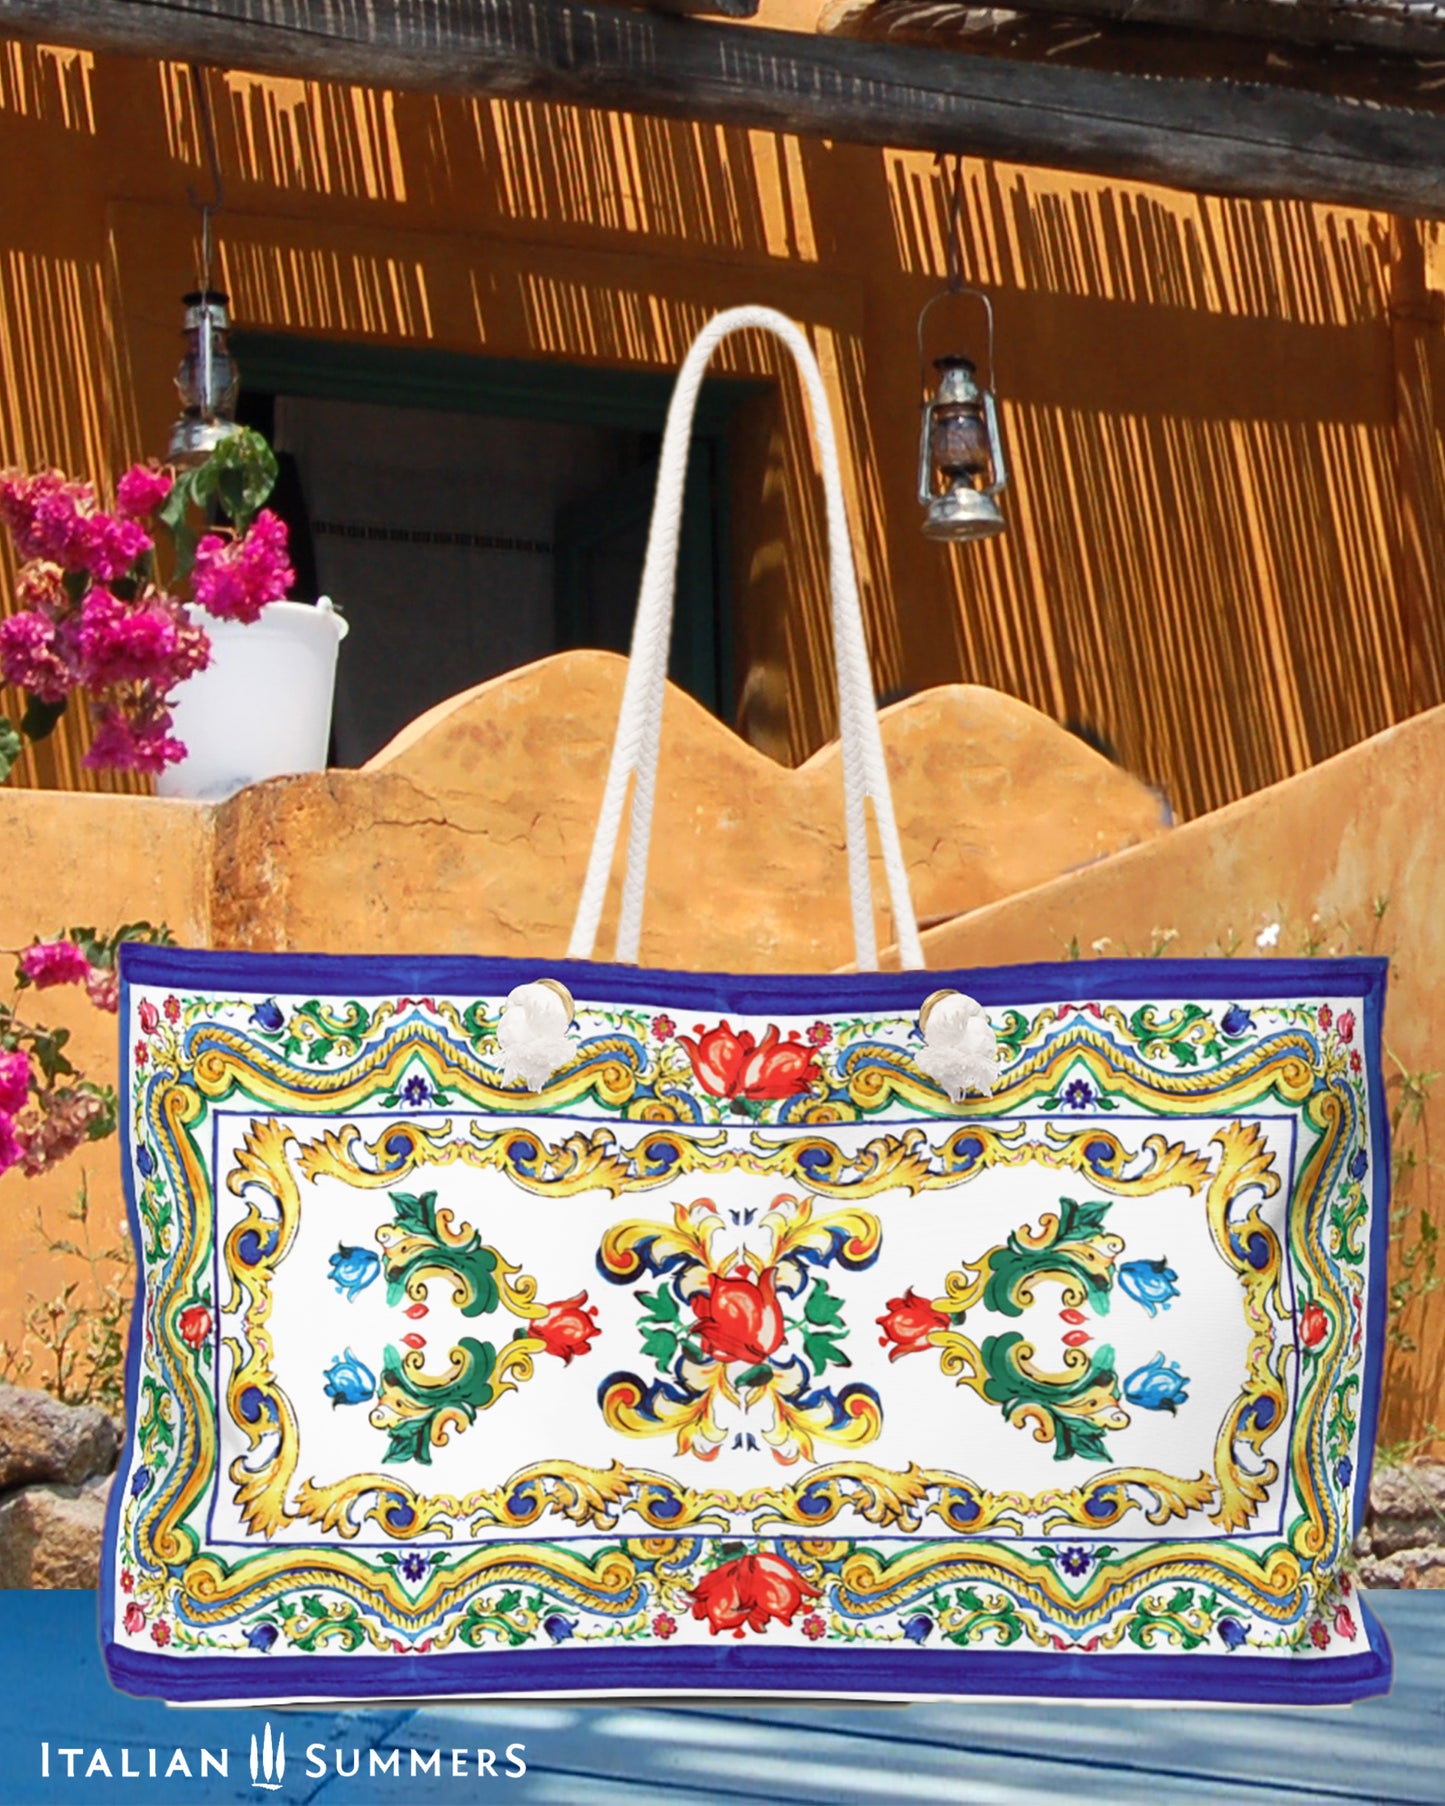 Italy beach bag inspired Sicilian baroque convolutes, Sicilian tiles and flowers. on the tim and bottom of the bag is a blue border. Main colors of the flowes/tiles are blue, red and green. The beach bag has soft rope handles. Designed by Italian Summers.